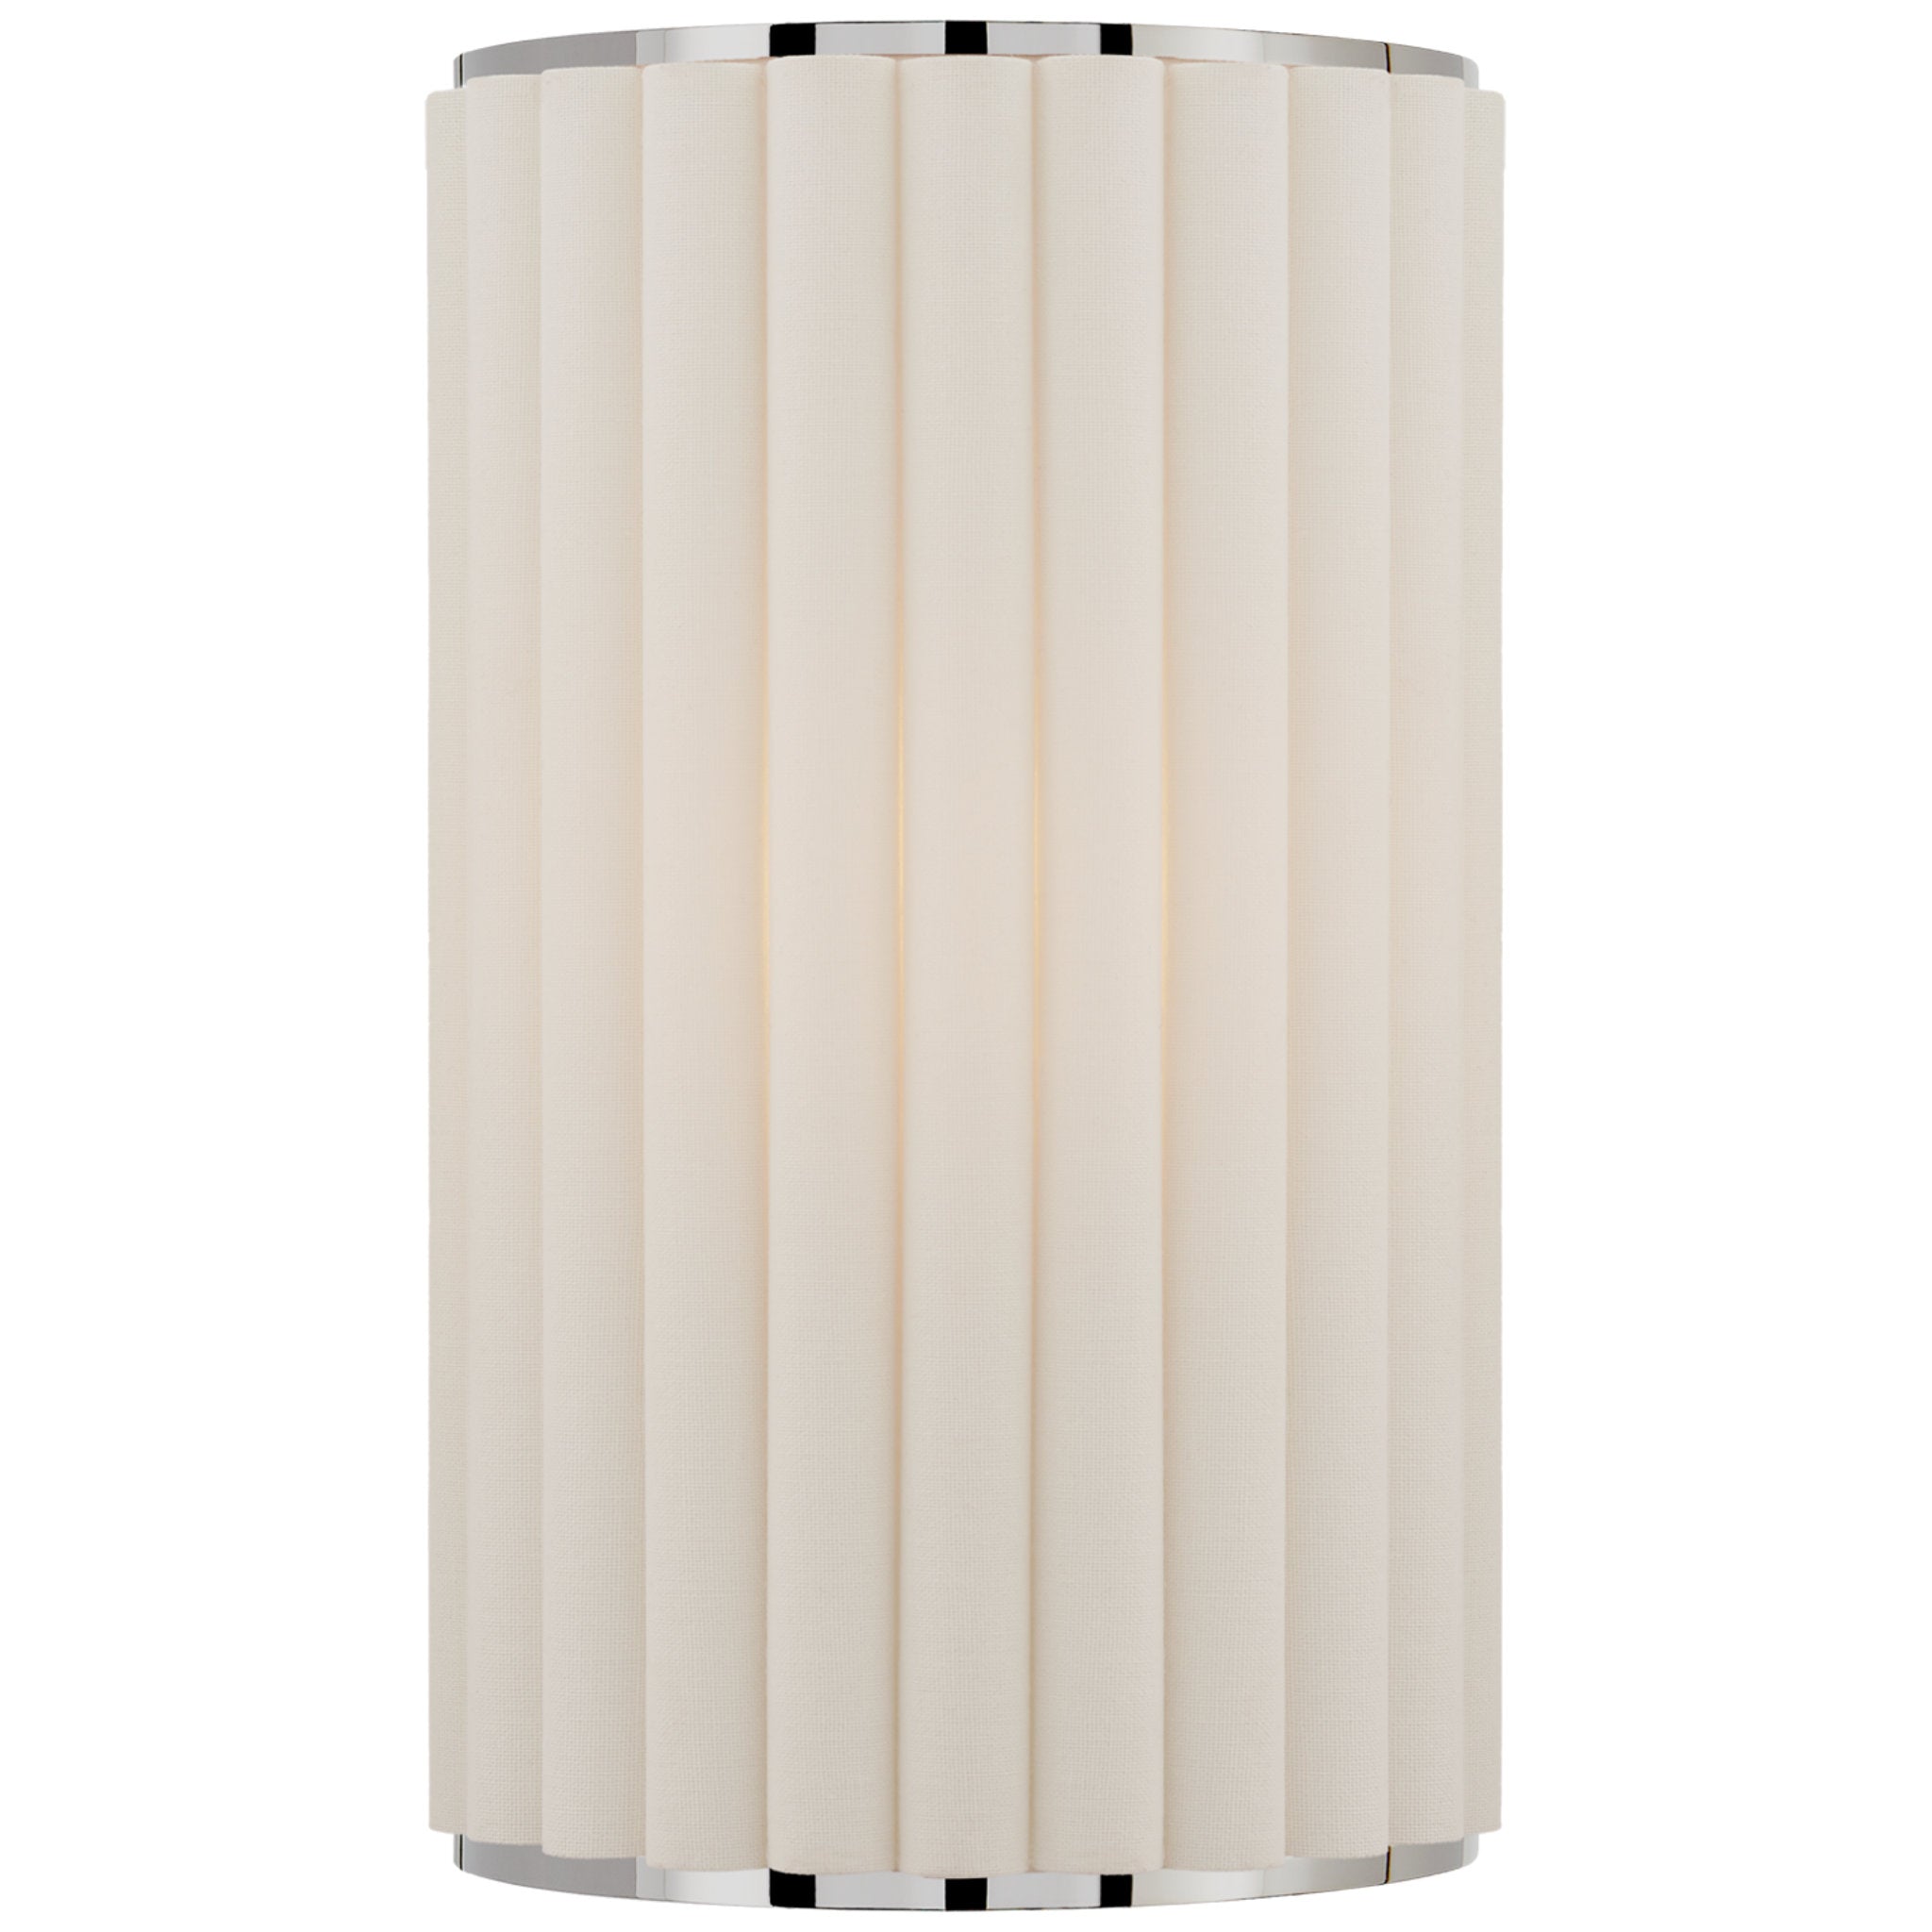 Ian K. Fowler Palati Small Sconce in Polished Nickel with Linen Shade